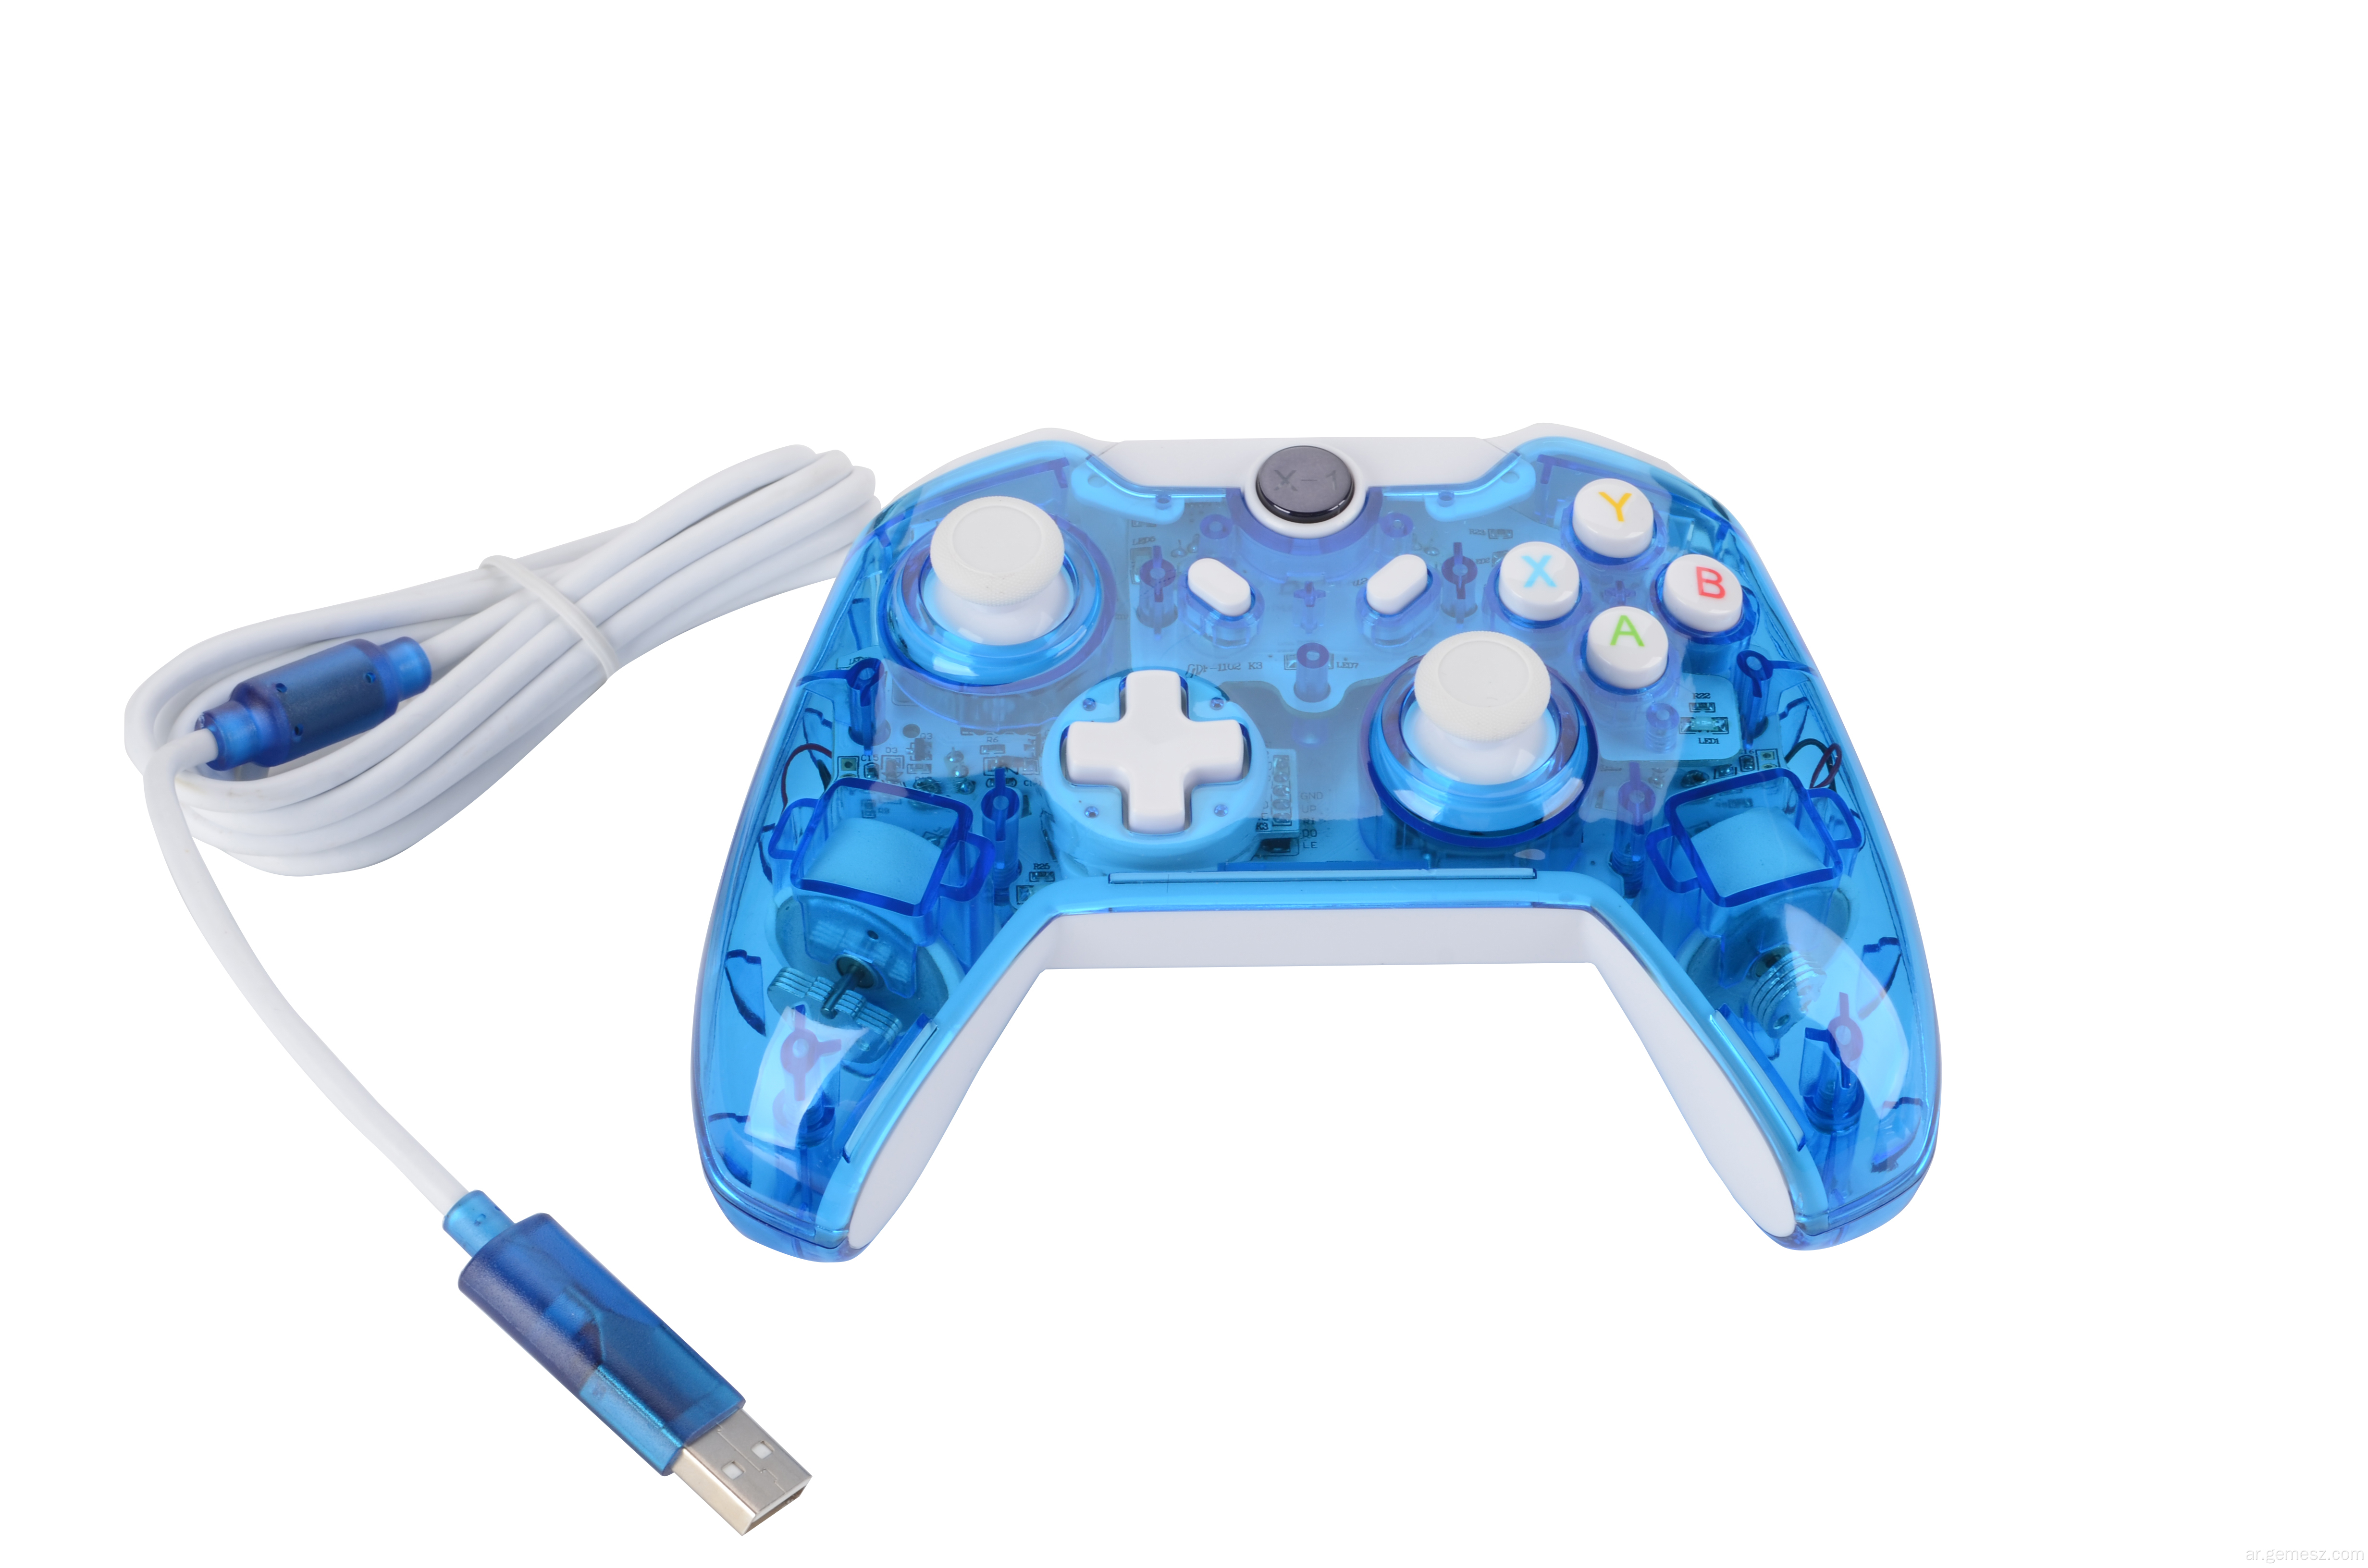 Transparent Blue Wired Game Joystick for Xbox one